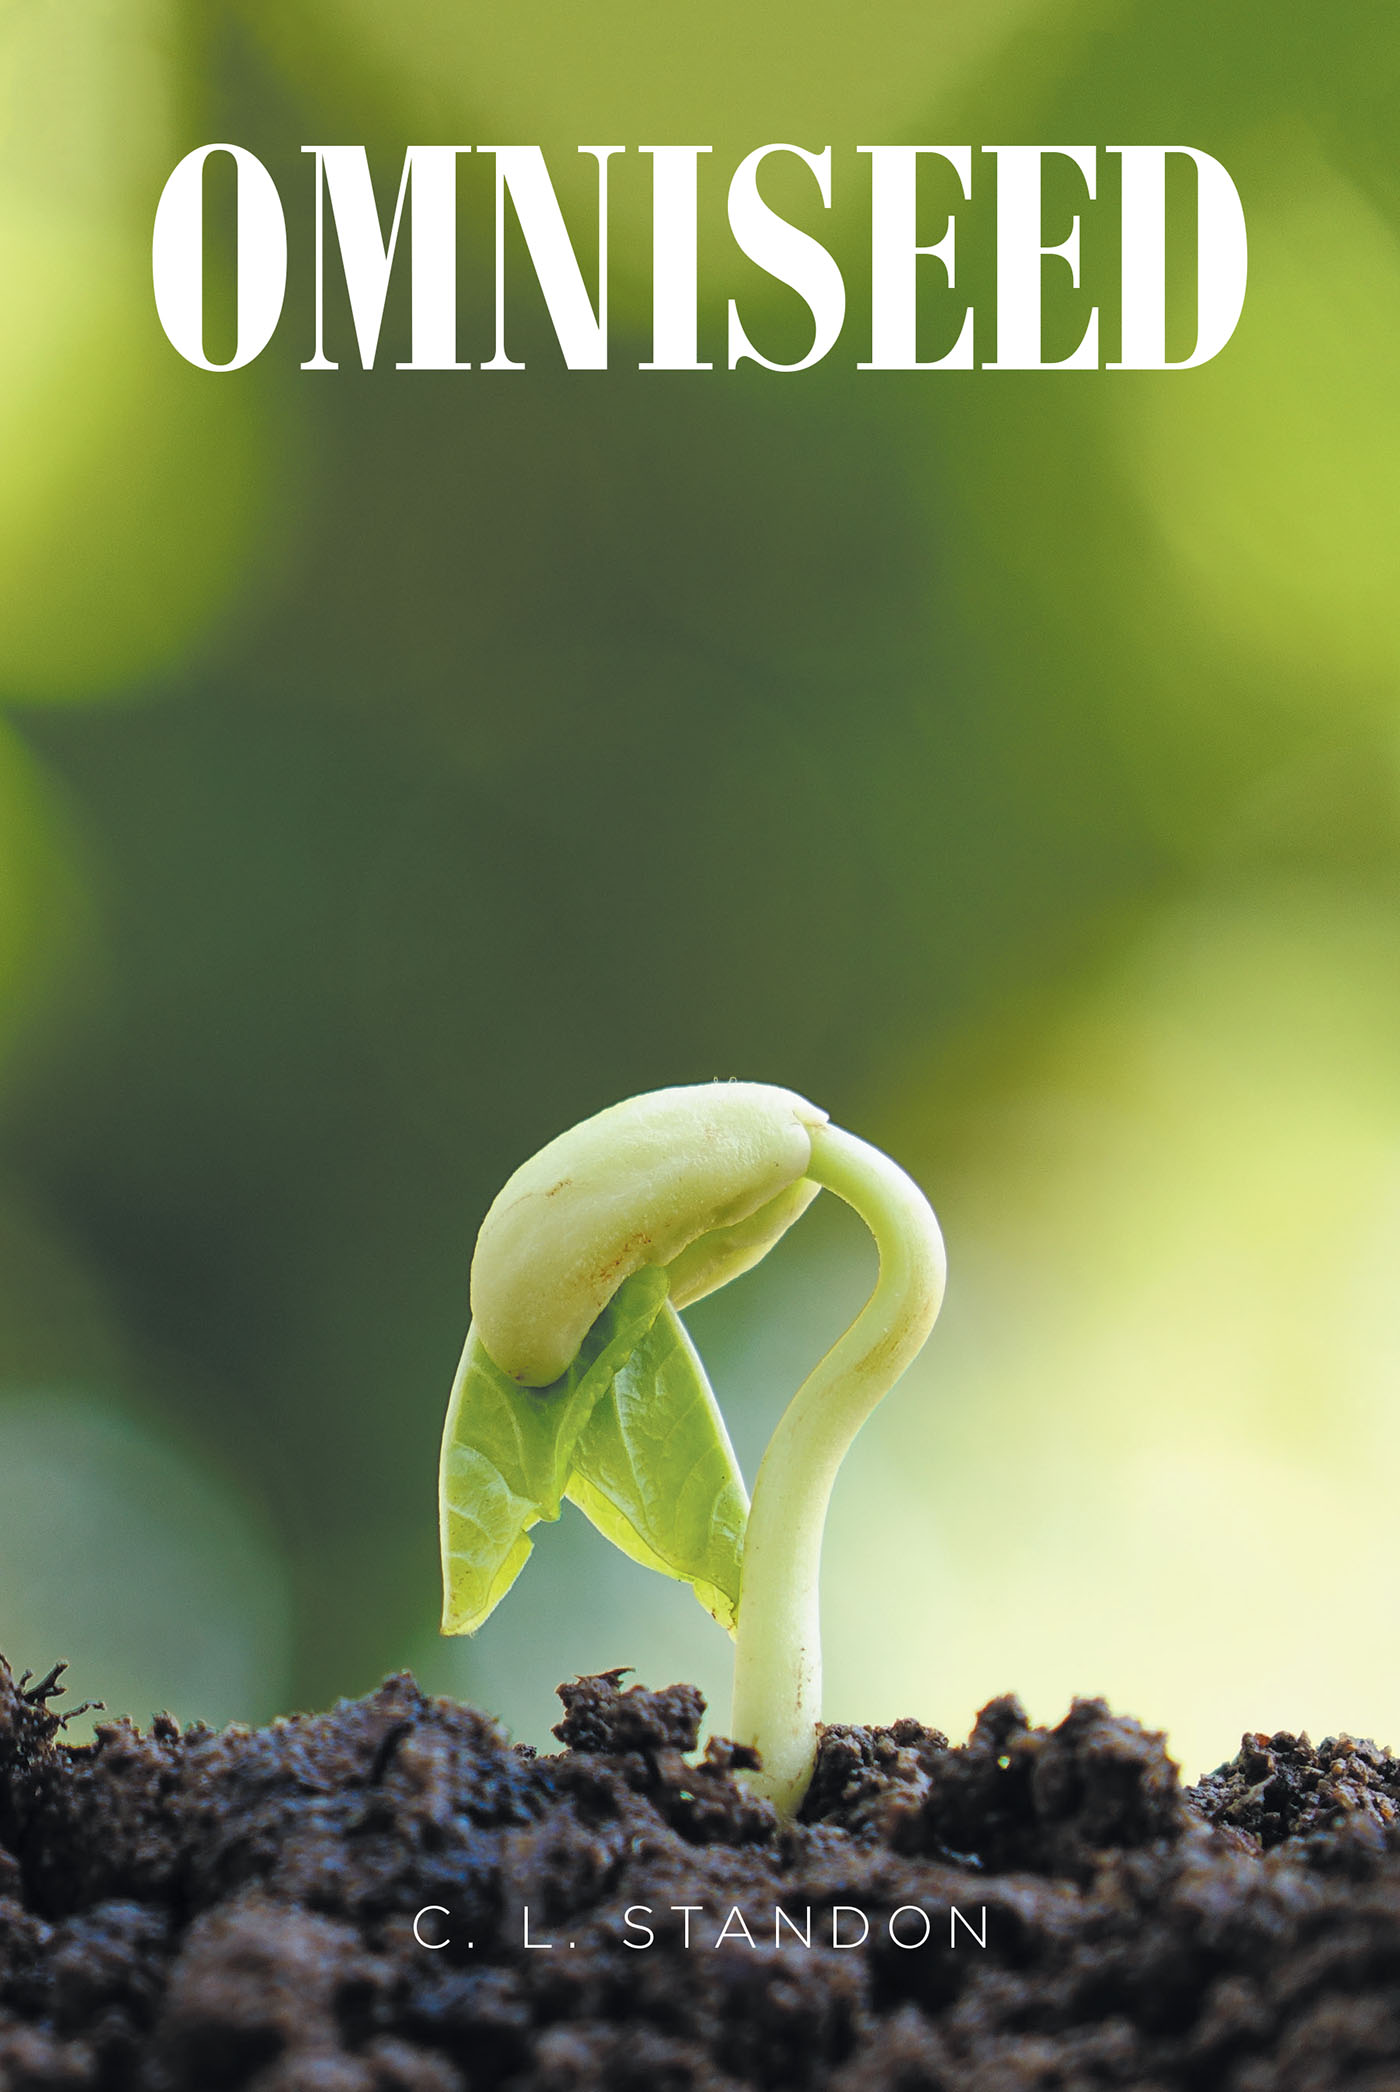 C. L. Standon’s Newly Released “OMNISEED” is a Compelling Fiction That Takes Readers on a Journey of Discovery During the Final Days of Life